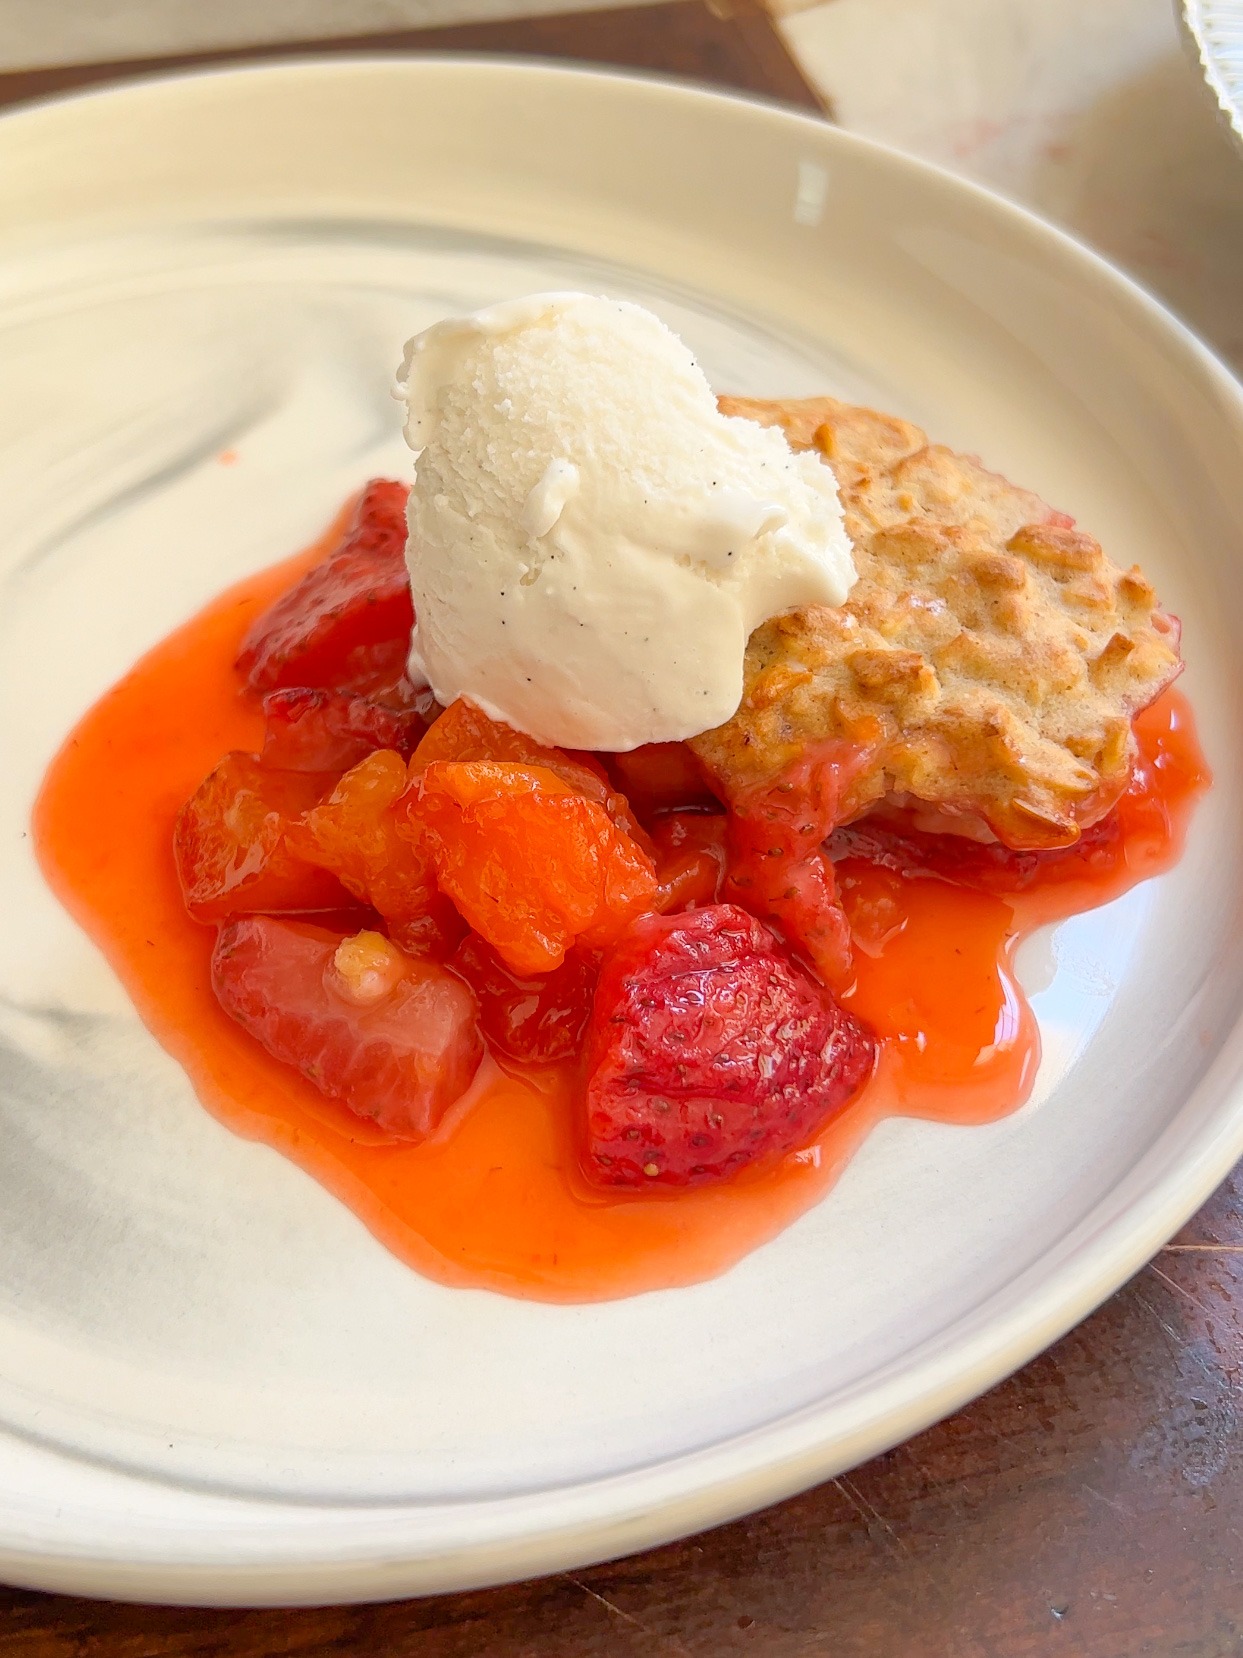 a plate with a scoop of strawberry peach cobbler topped with a scoop of ice cream